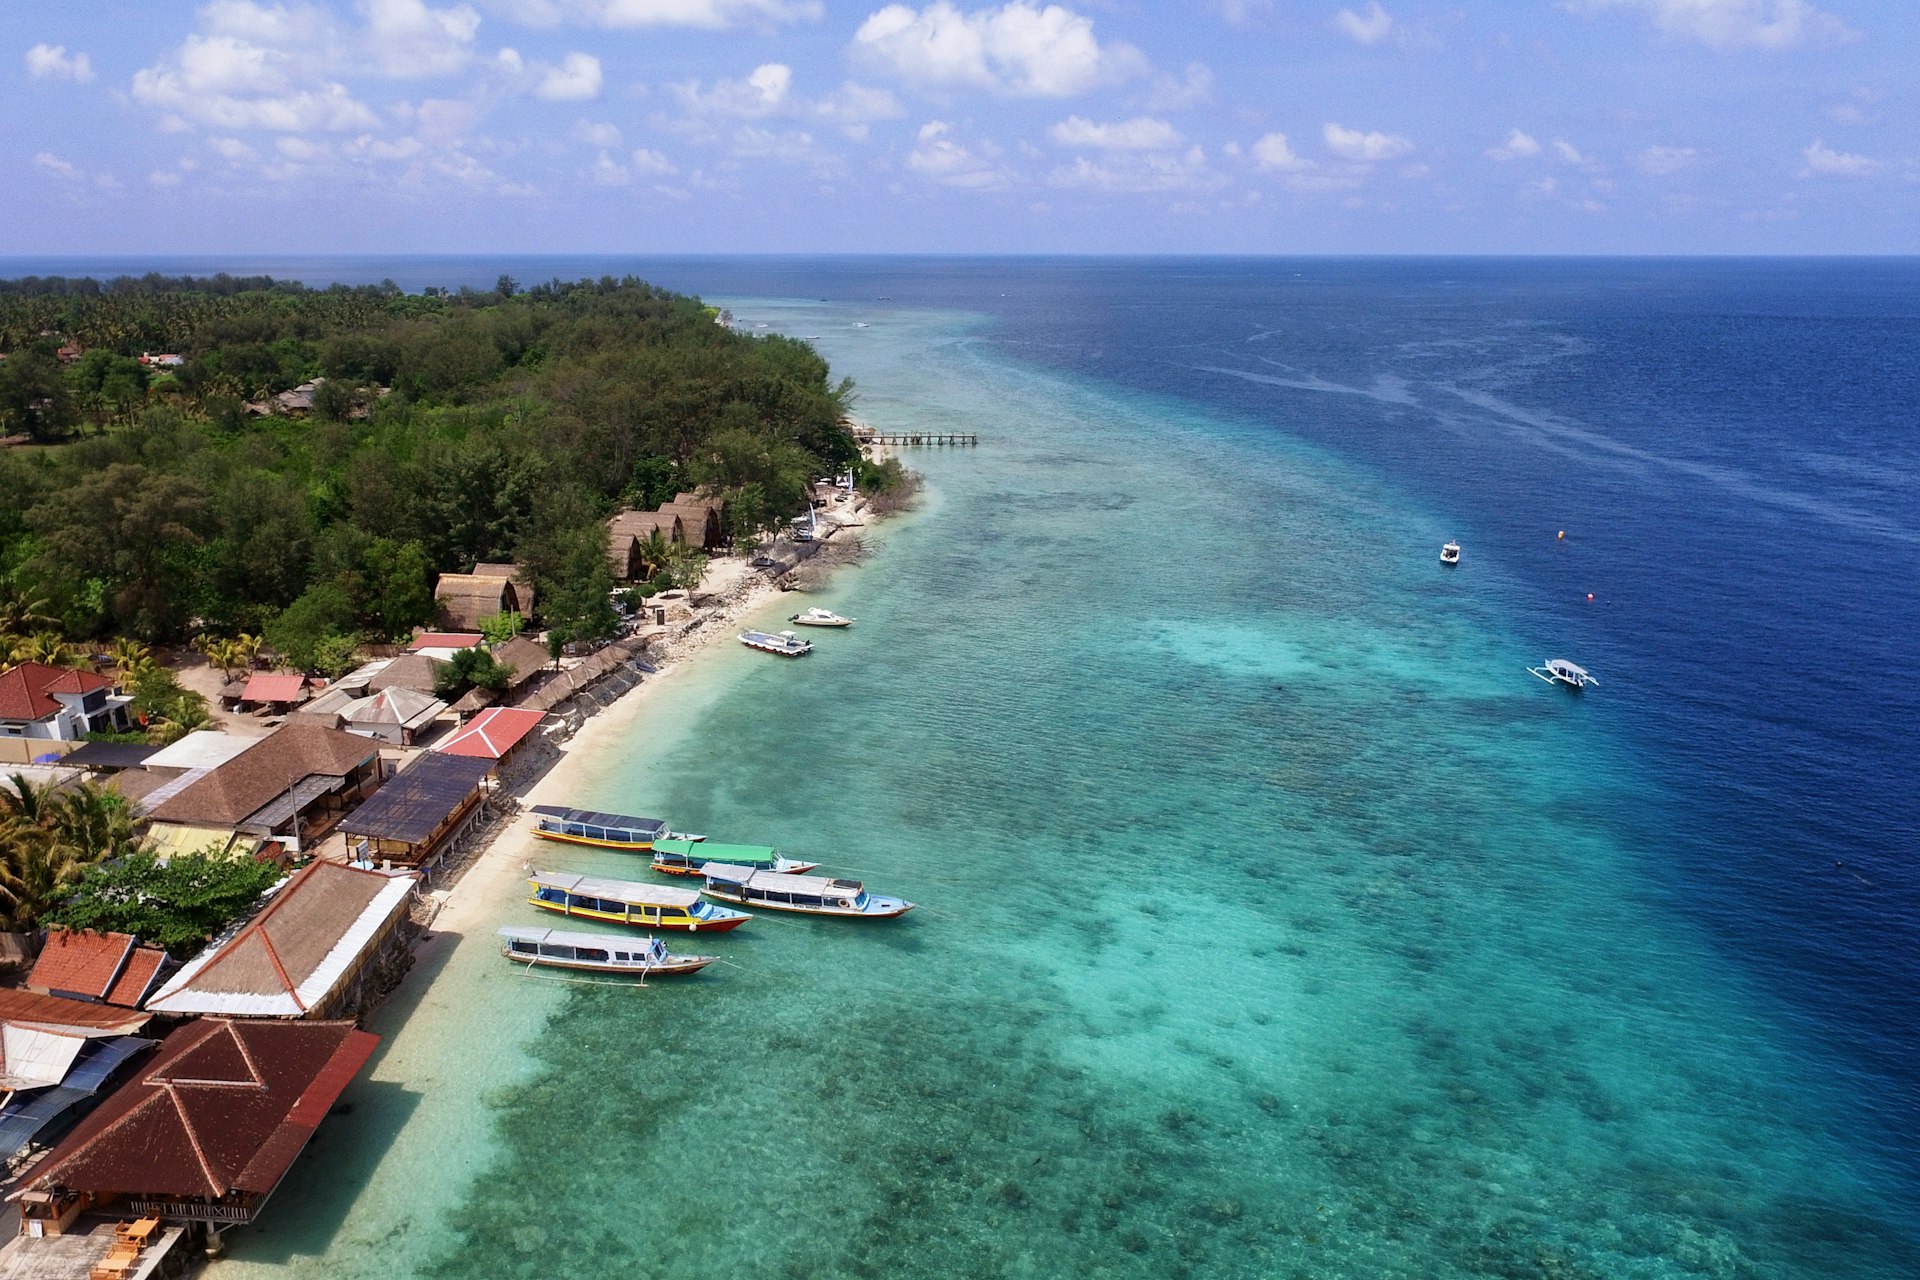 An aerial shot of ferry boats on a beach in the Gili Islands